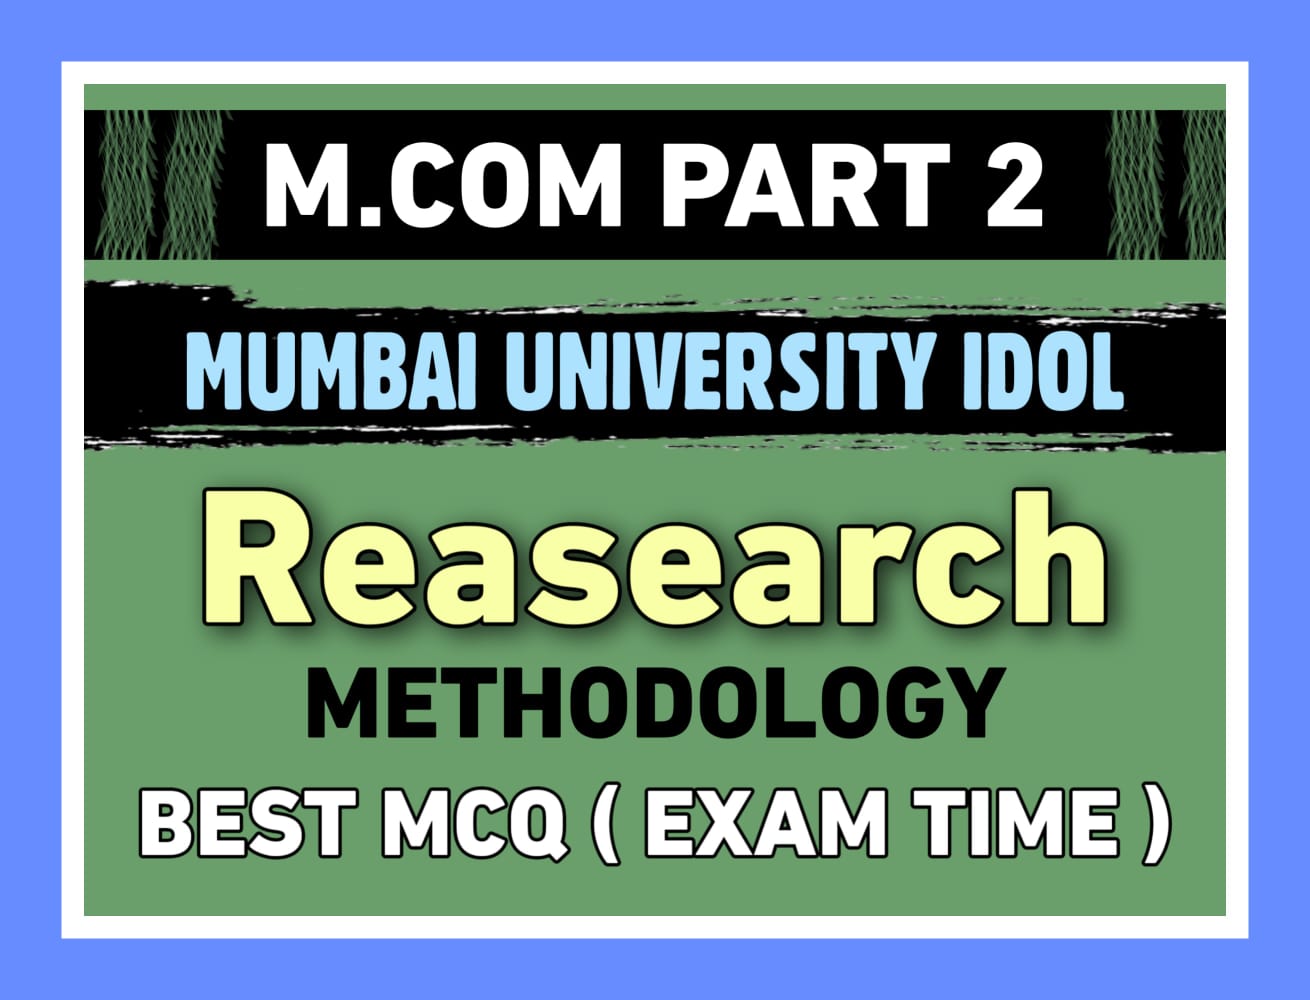 research methodology mcq questions with answers pdf